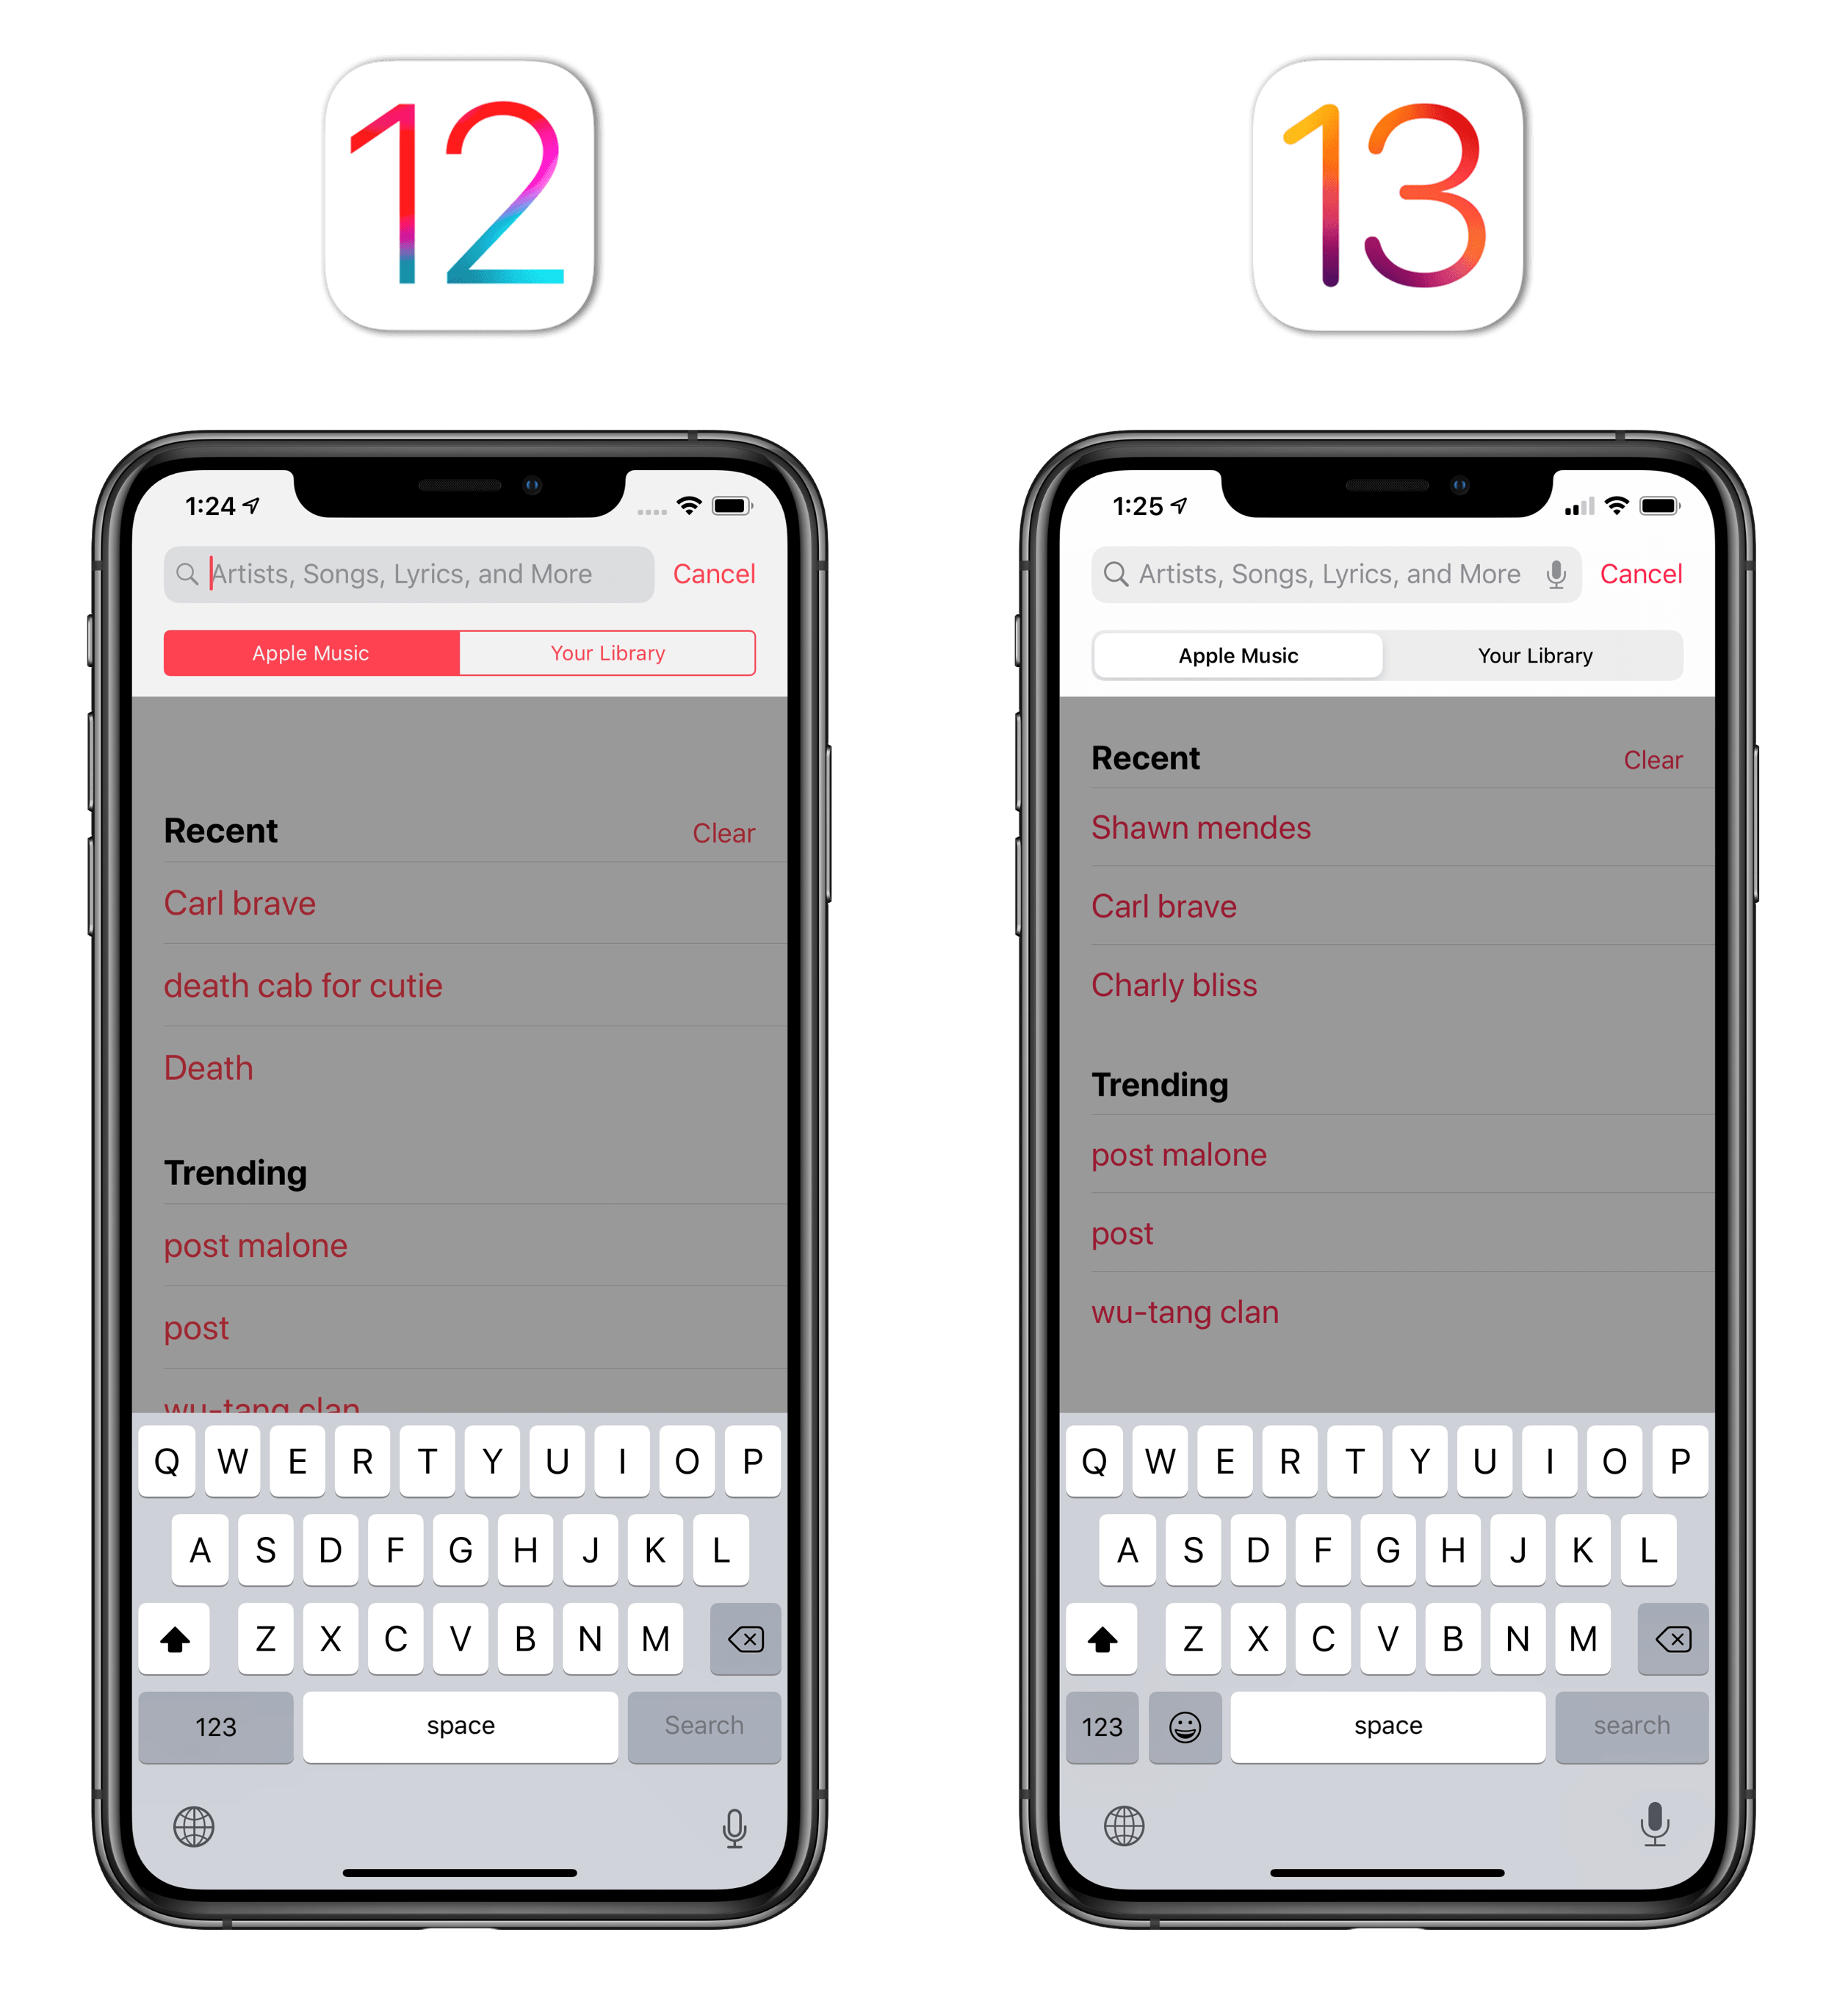 Segmented controls have been redesigned in iOS 13.